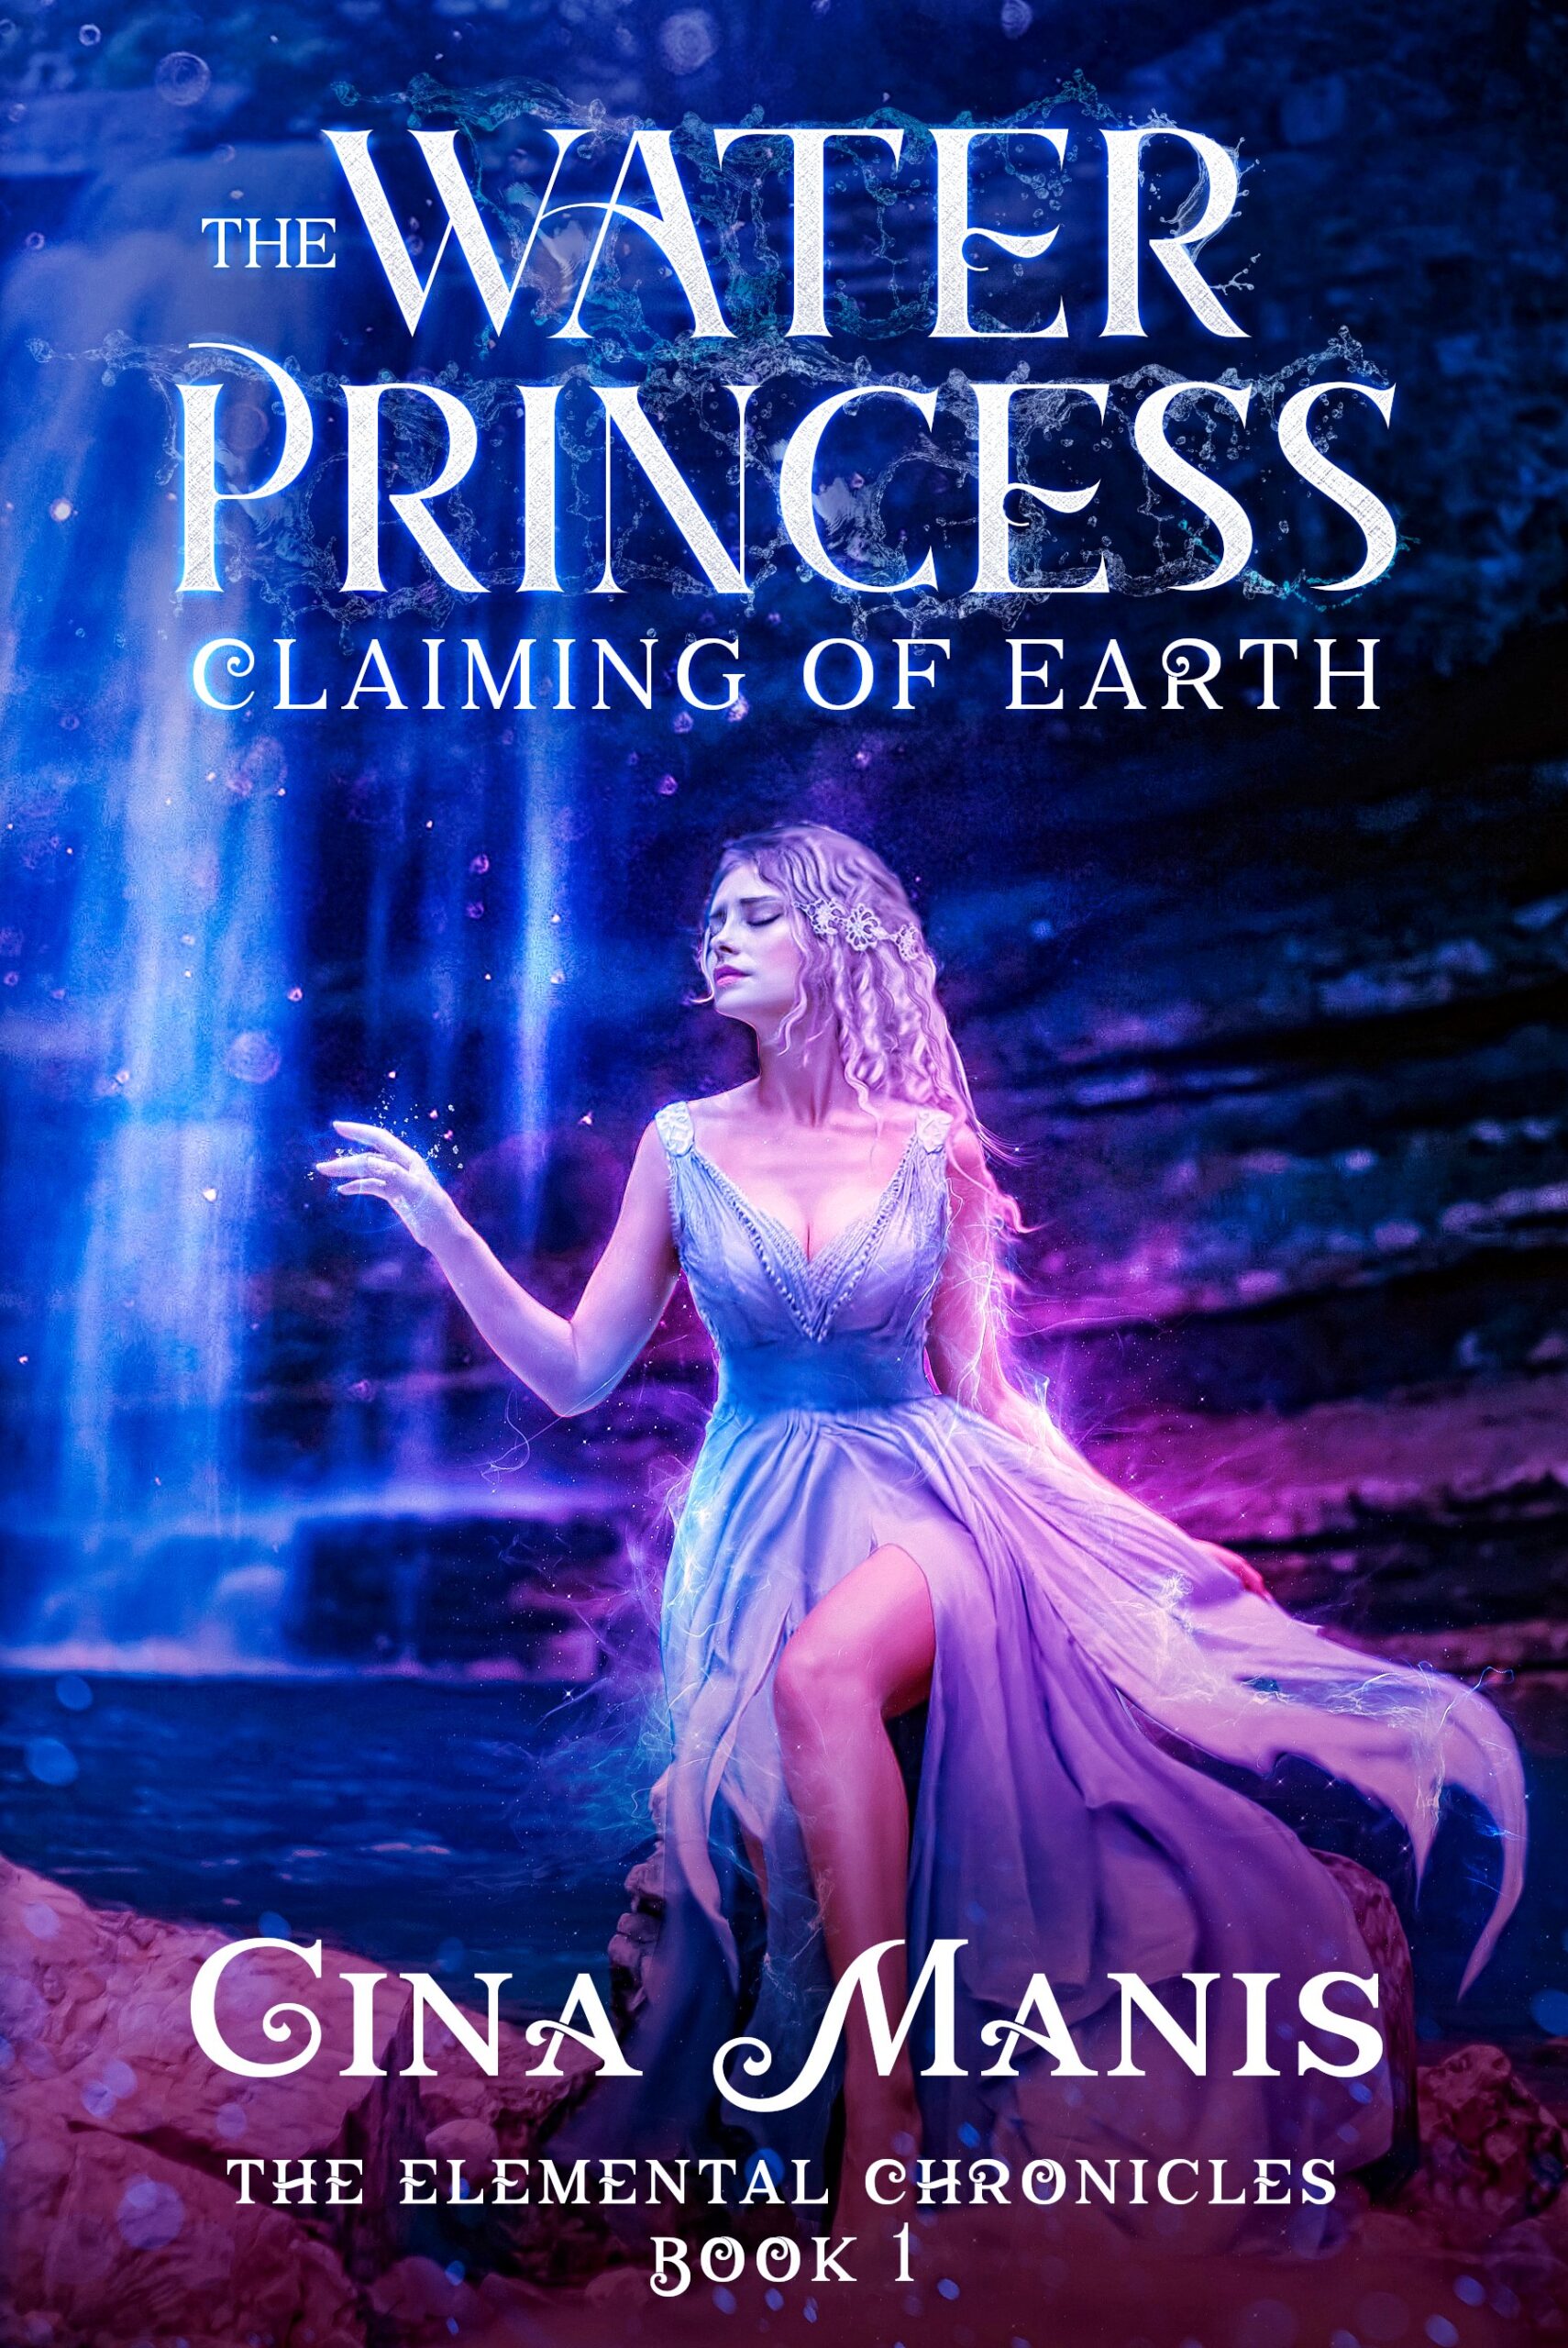 The Water Princess Claiming of Earth (The Elemental Chronicles Book 1) by Gina Manis